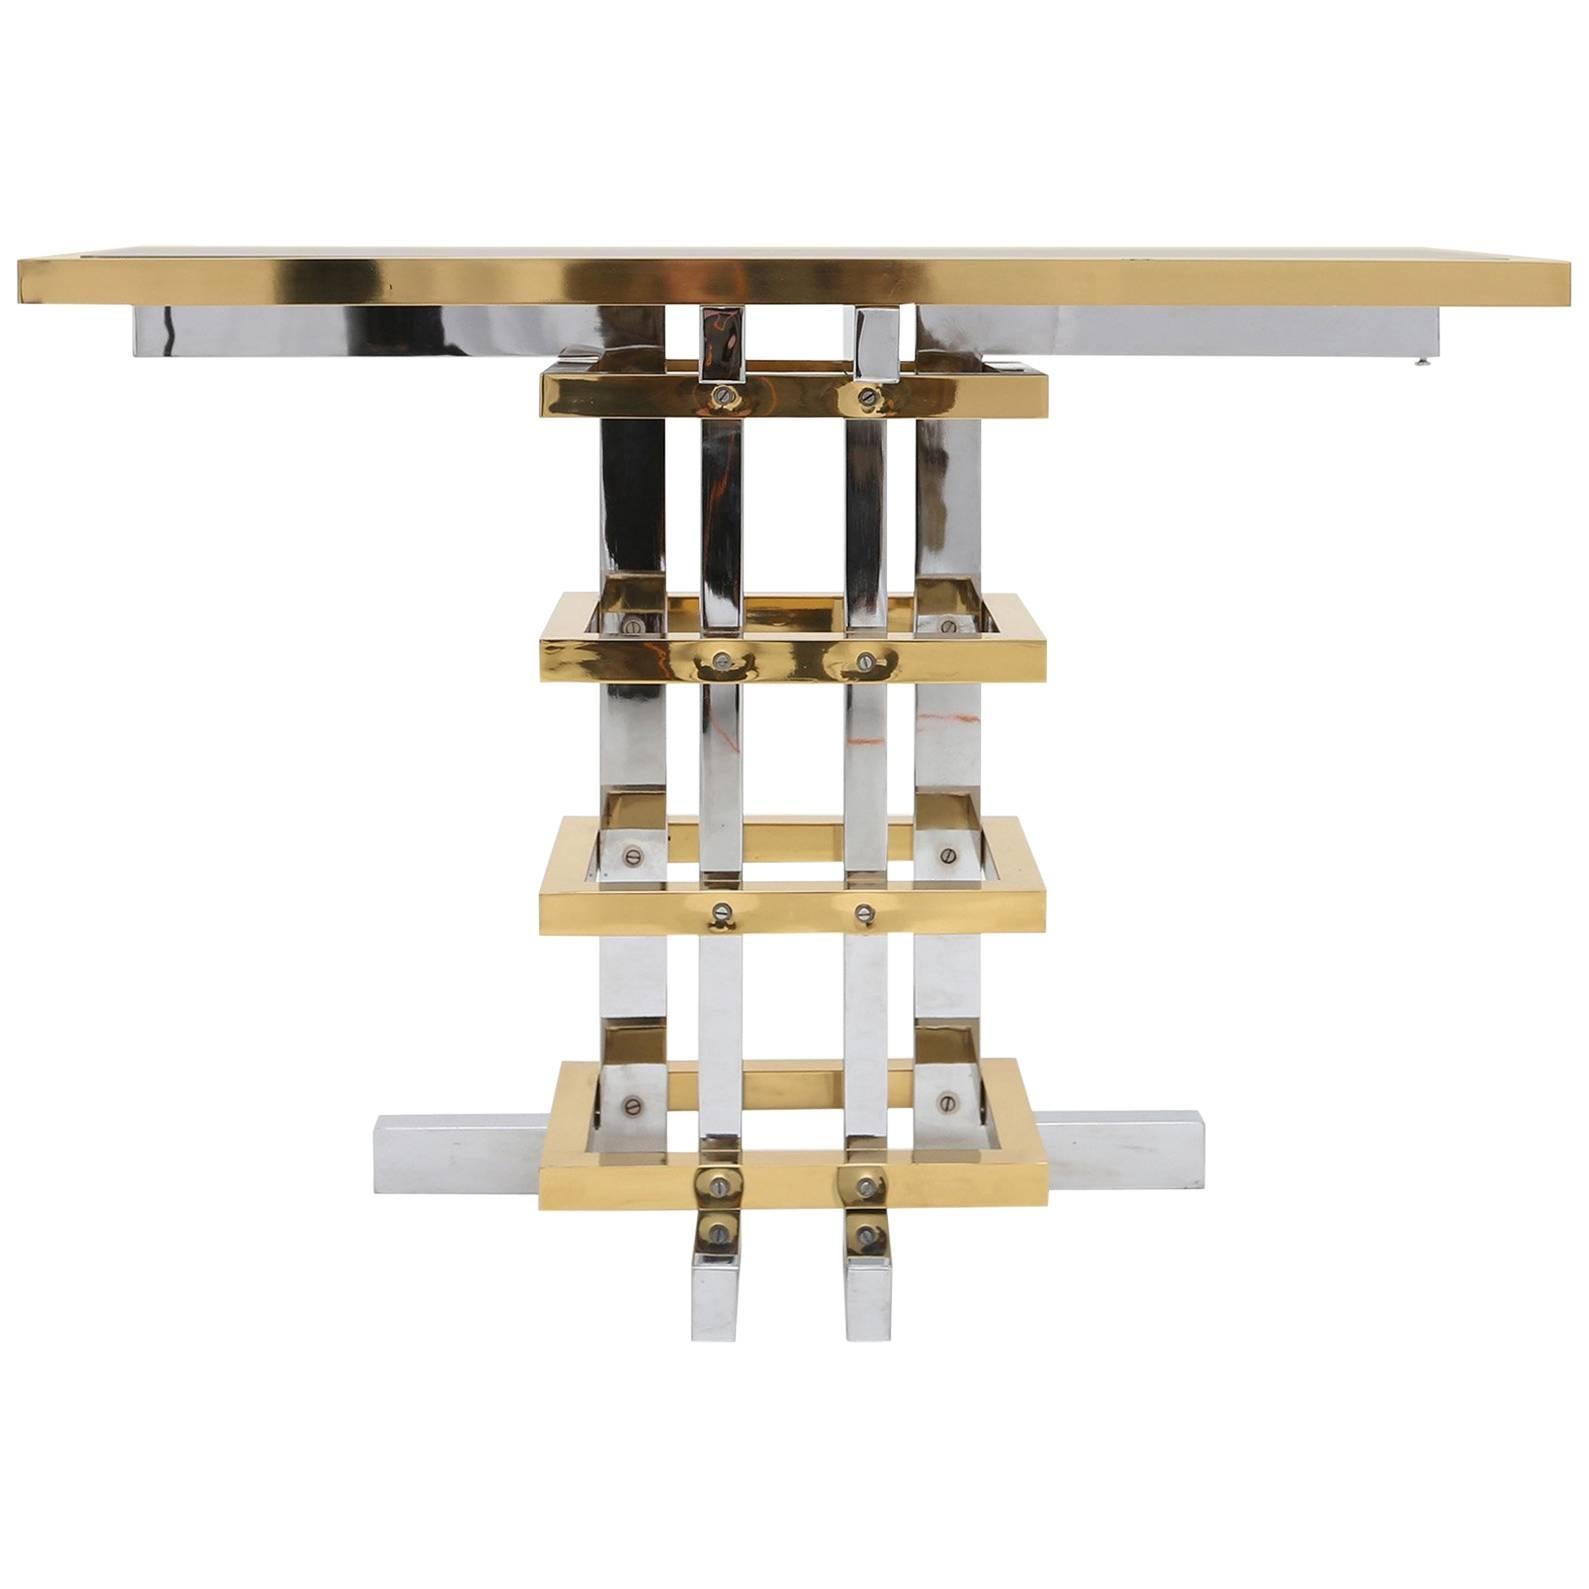 Brass and chrome console table, style Maison Jansen.
by artist Duchise. Knokke, Belgium, 1970s.
Would fit well in an eclectic interior inspired by Pierre Cardin, Romeo Rega or Willy Rizzo.

Brass and chromed metal. 
Smoked mirrored glas